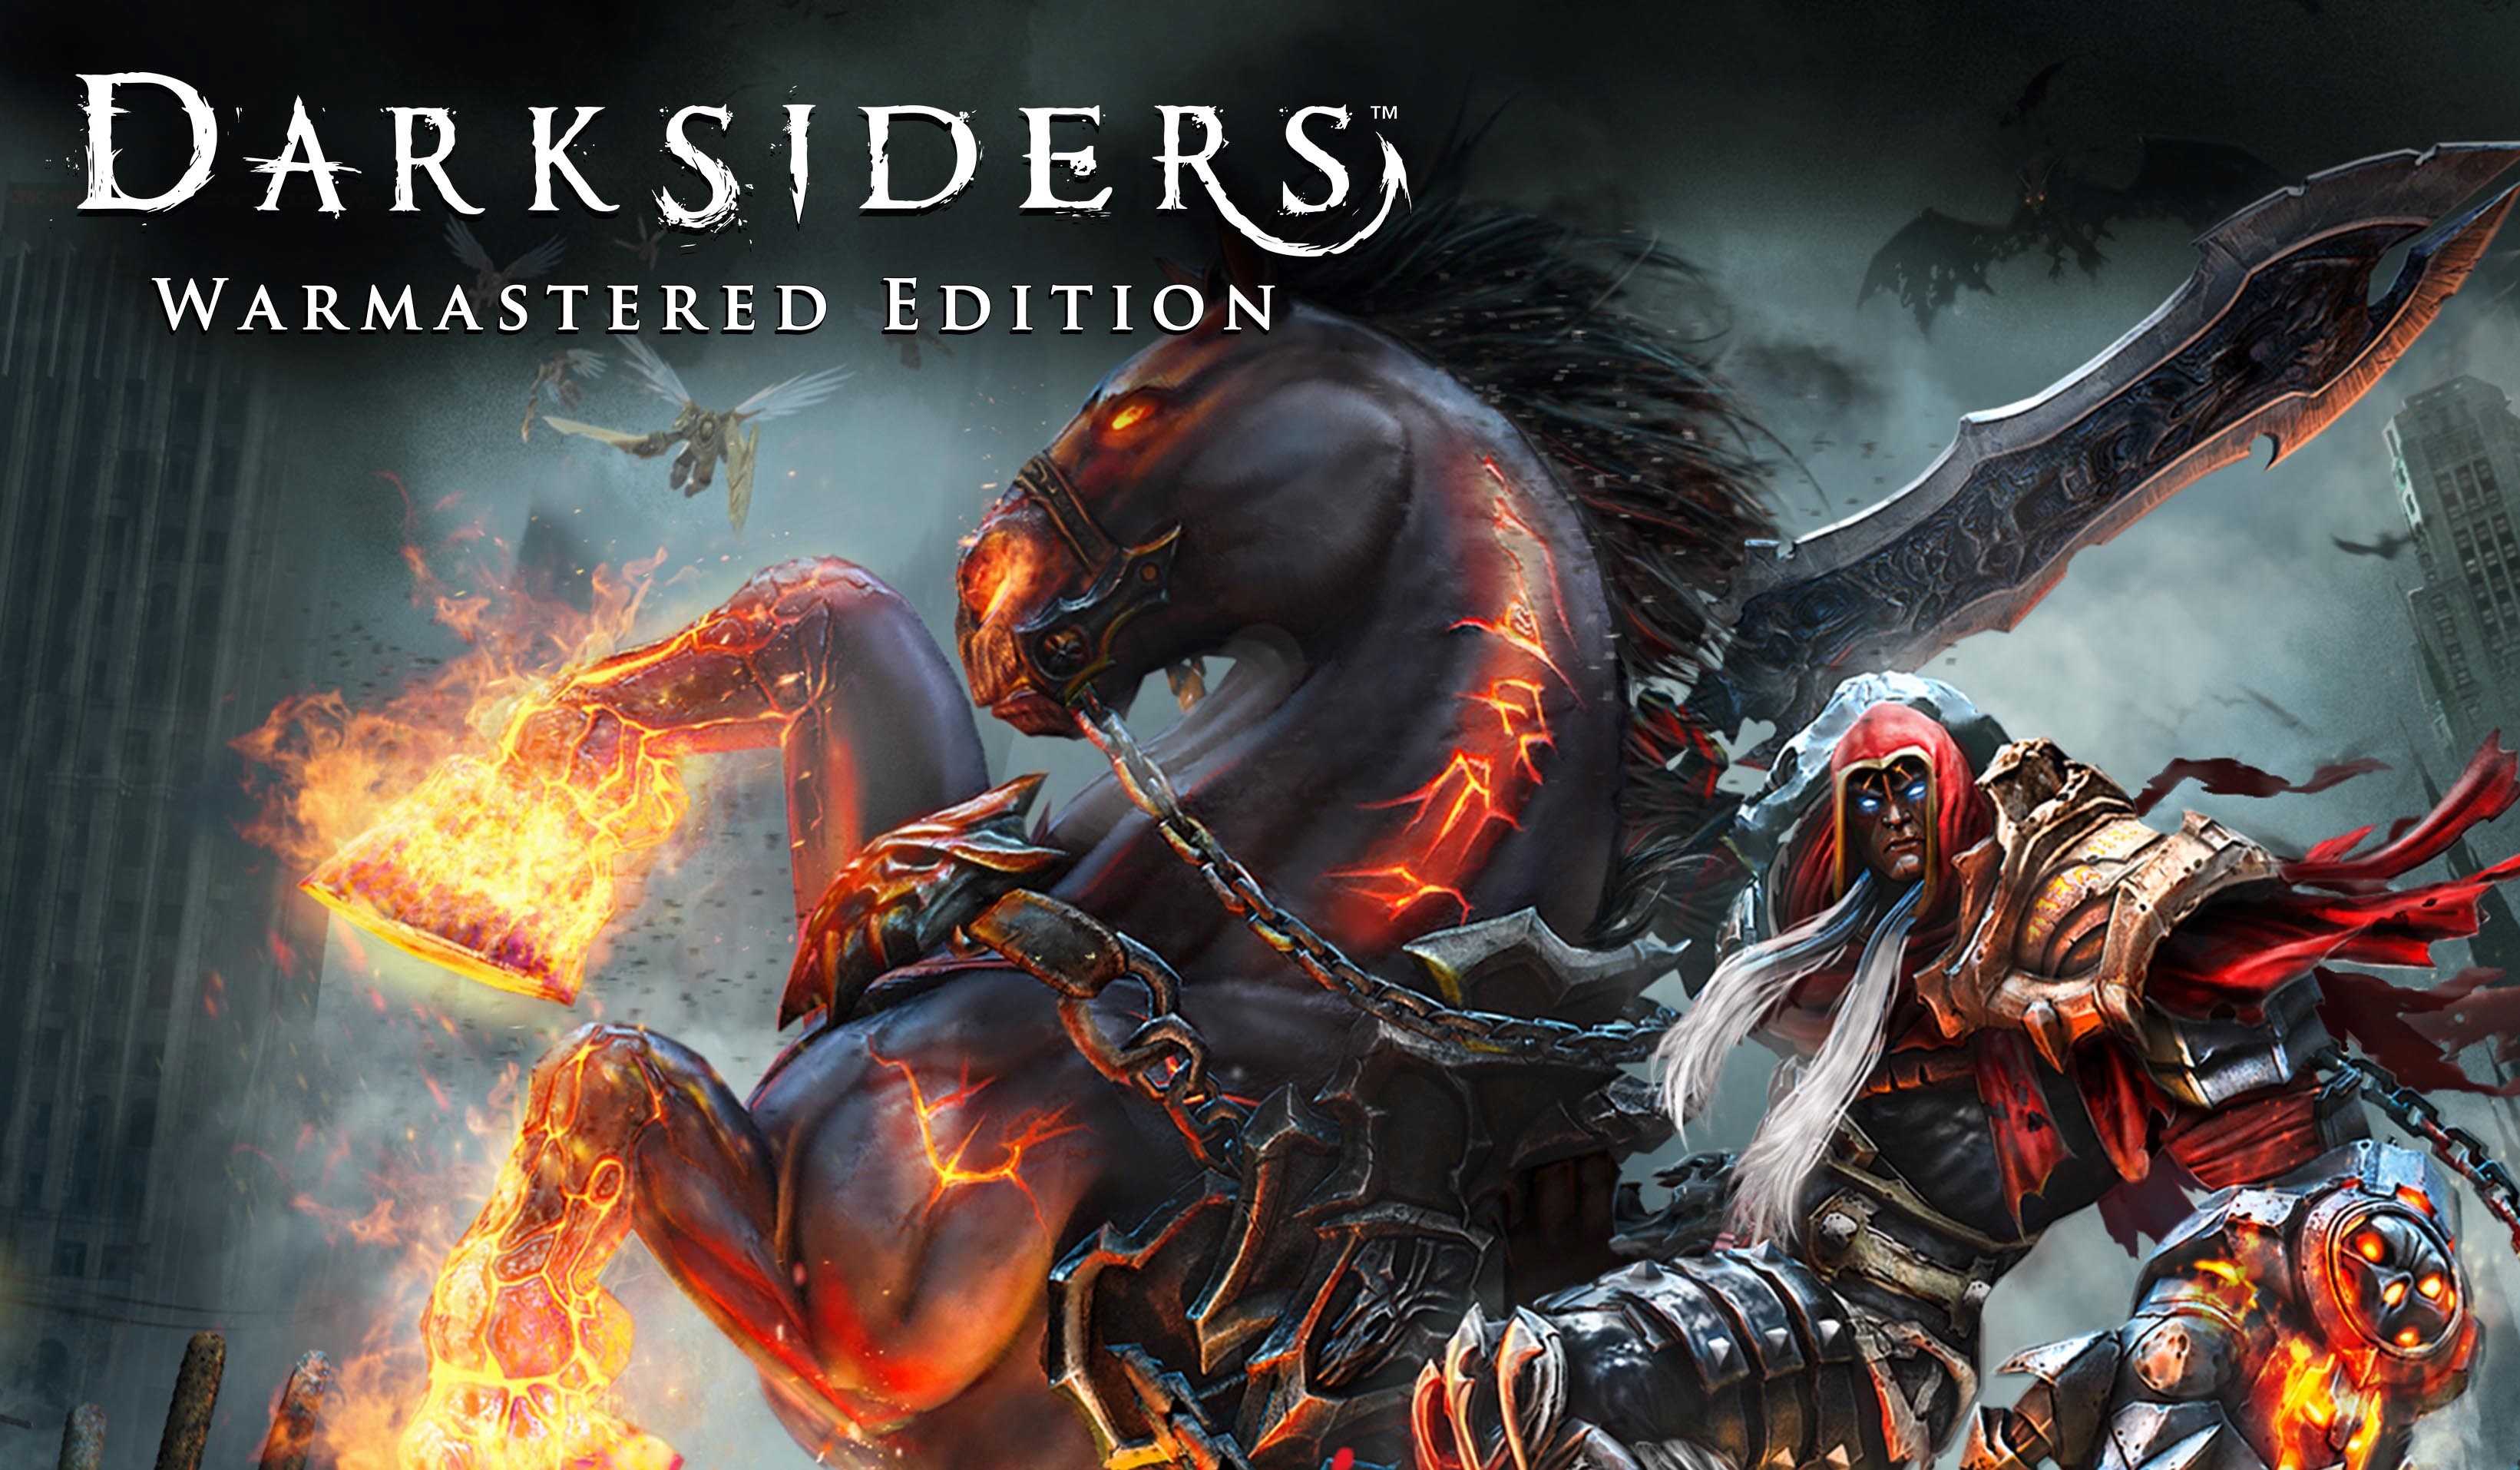 Darksiders: Warmastered Edition is Revealed for PC, PS4, Wii U, and Xbox One